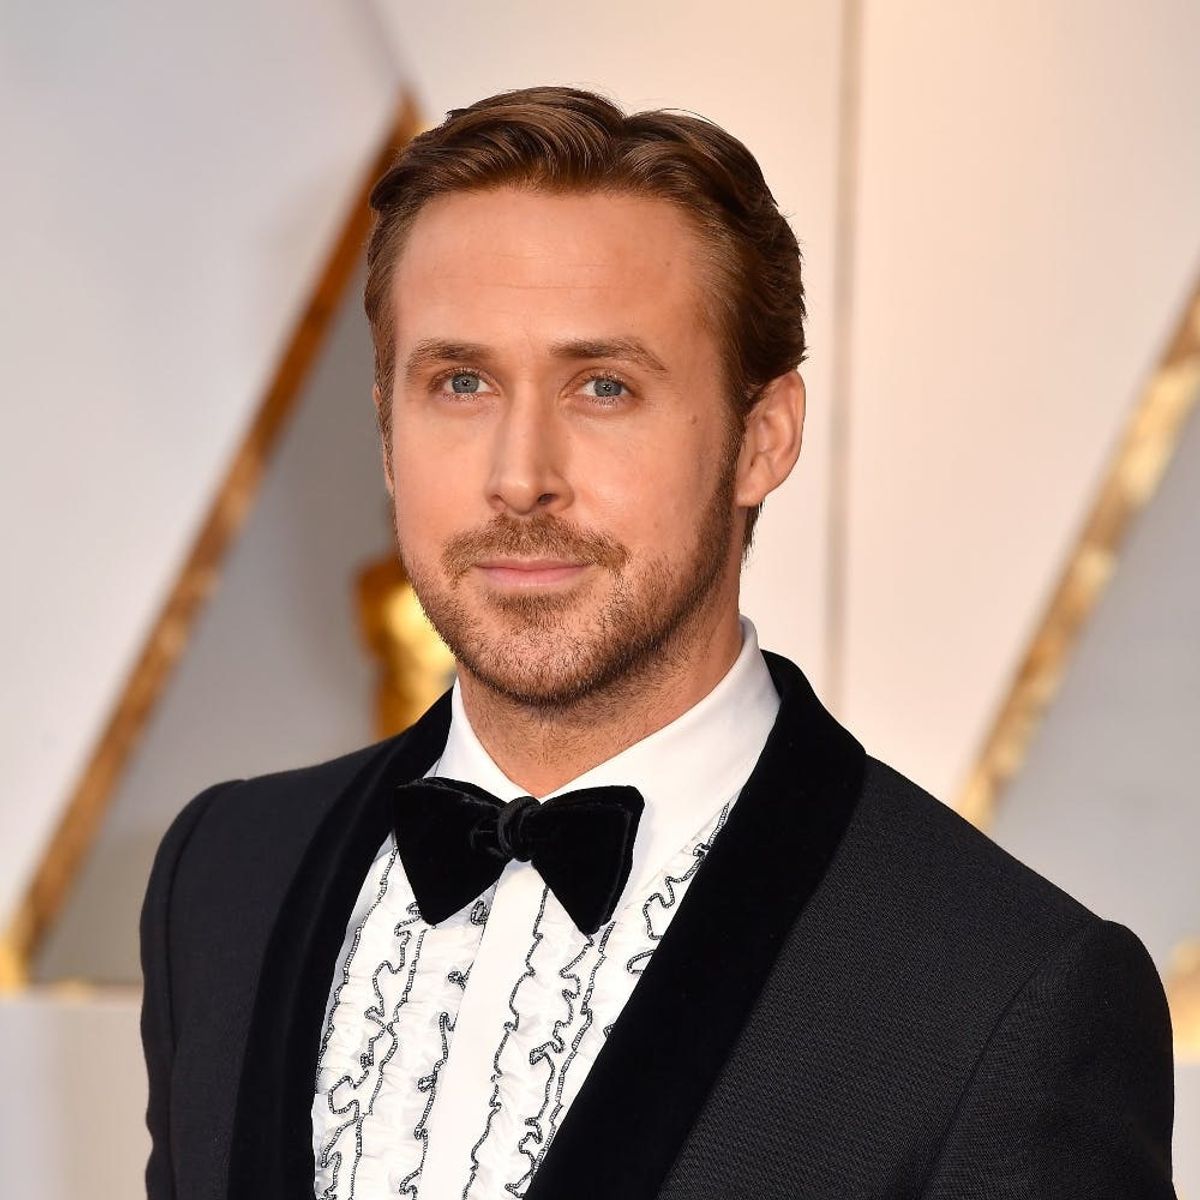 Ryan Gosling Brought a Mystery Date to the Oscars and We Know Who She Is